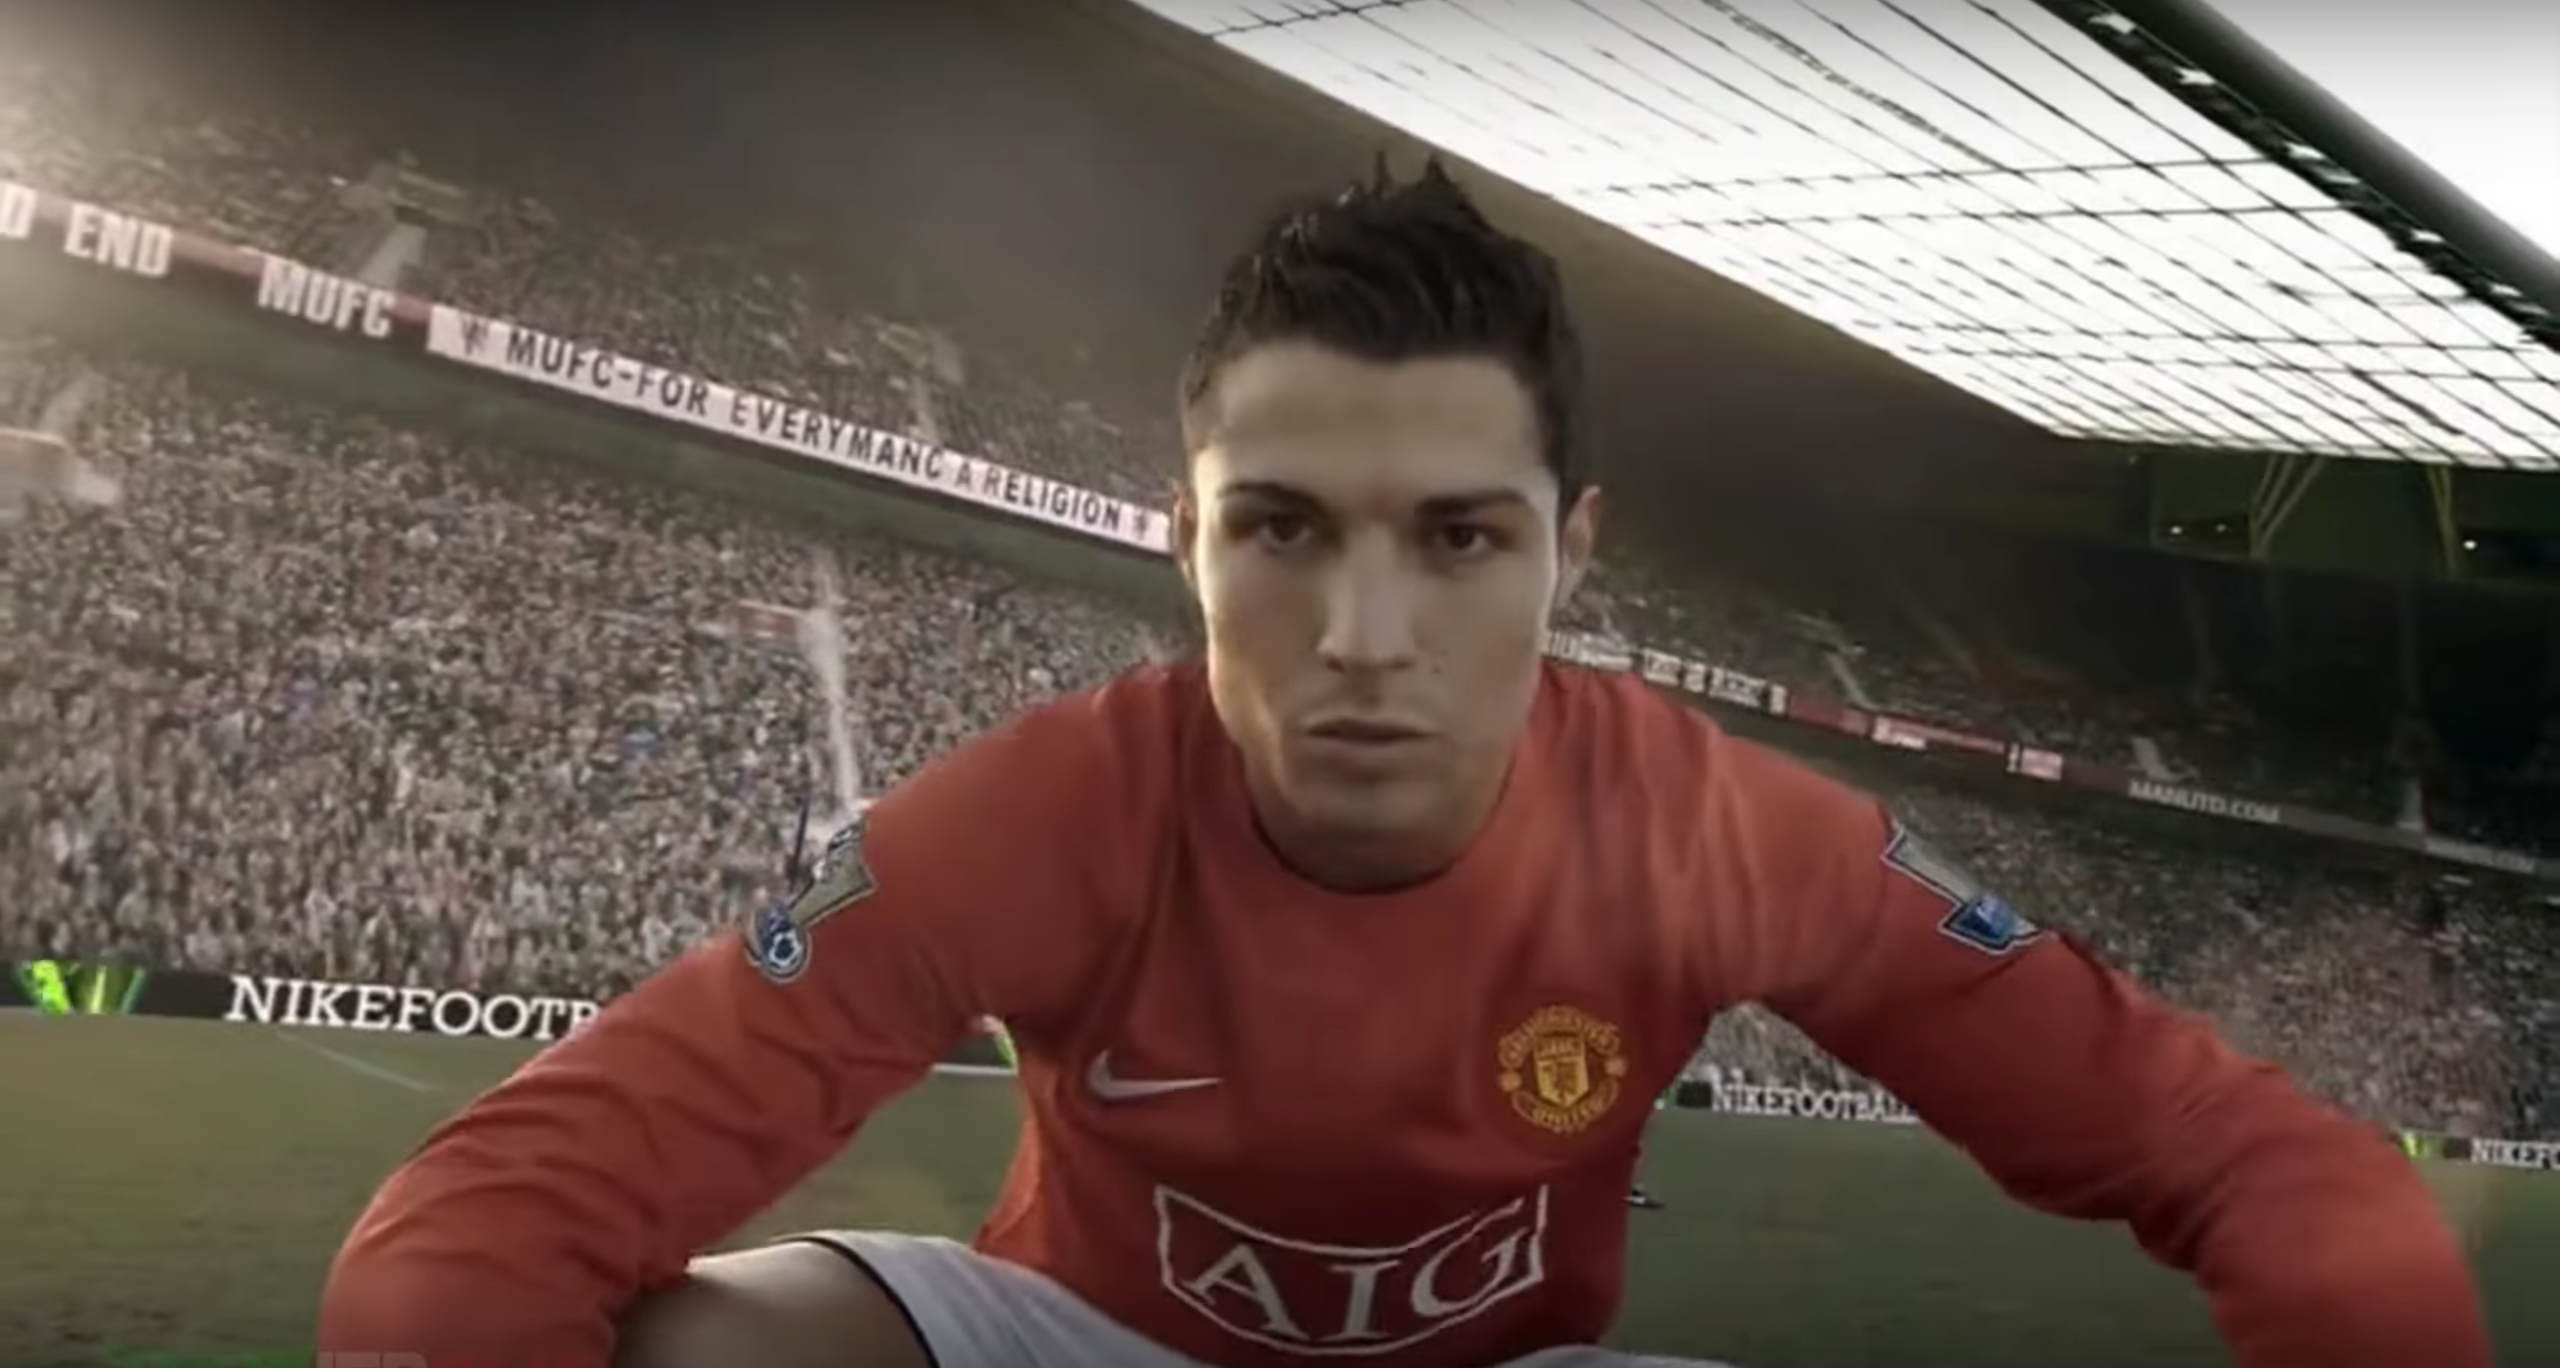 The Best Soccer Commercial Come From Nike